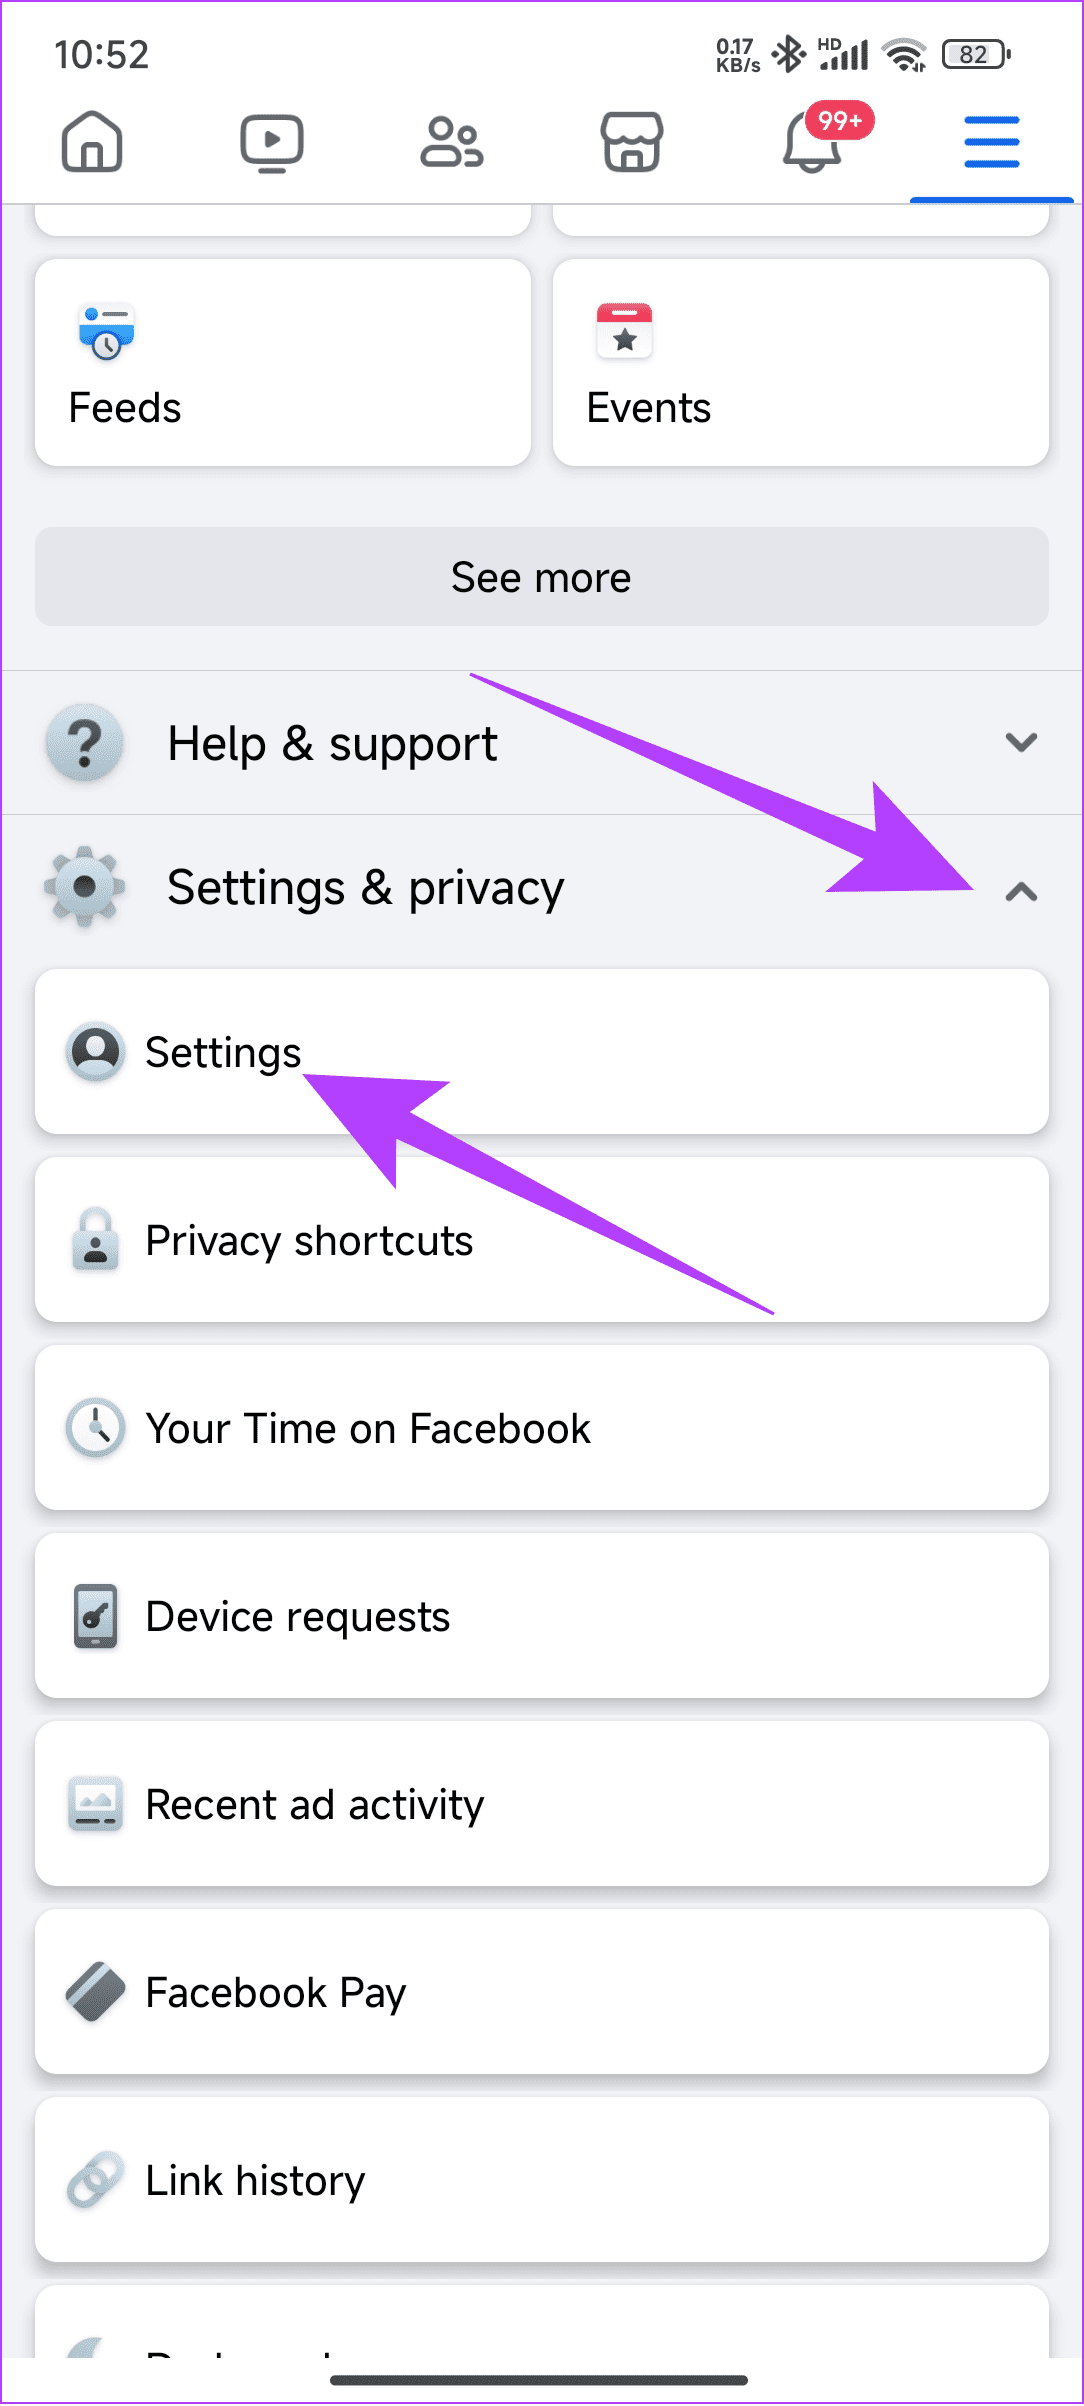 Open settings and privacy and then select Settings